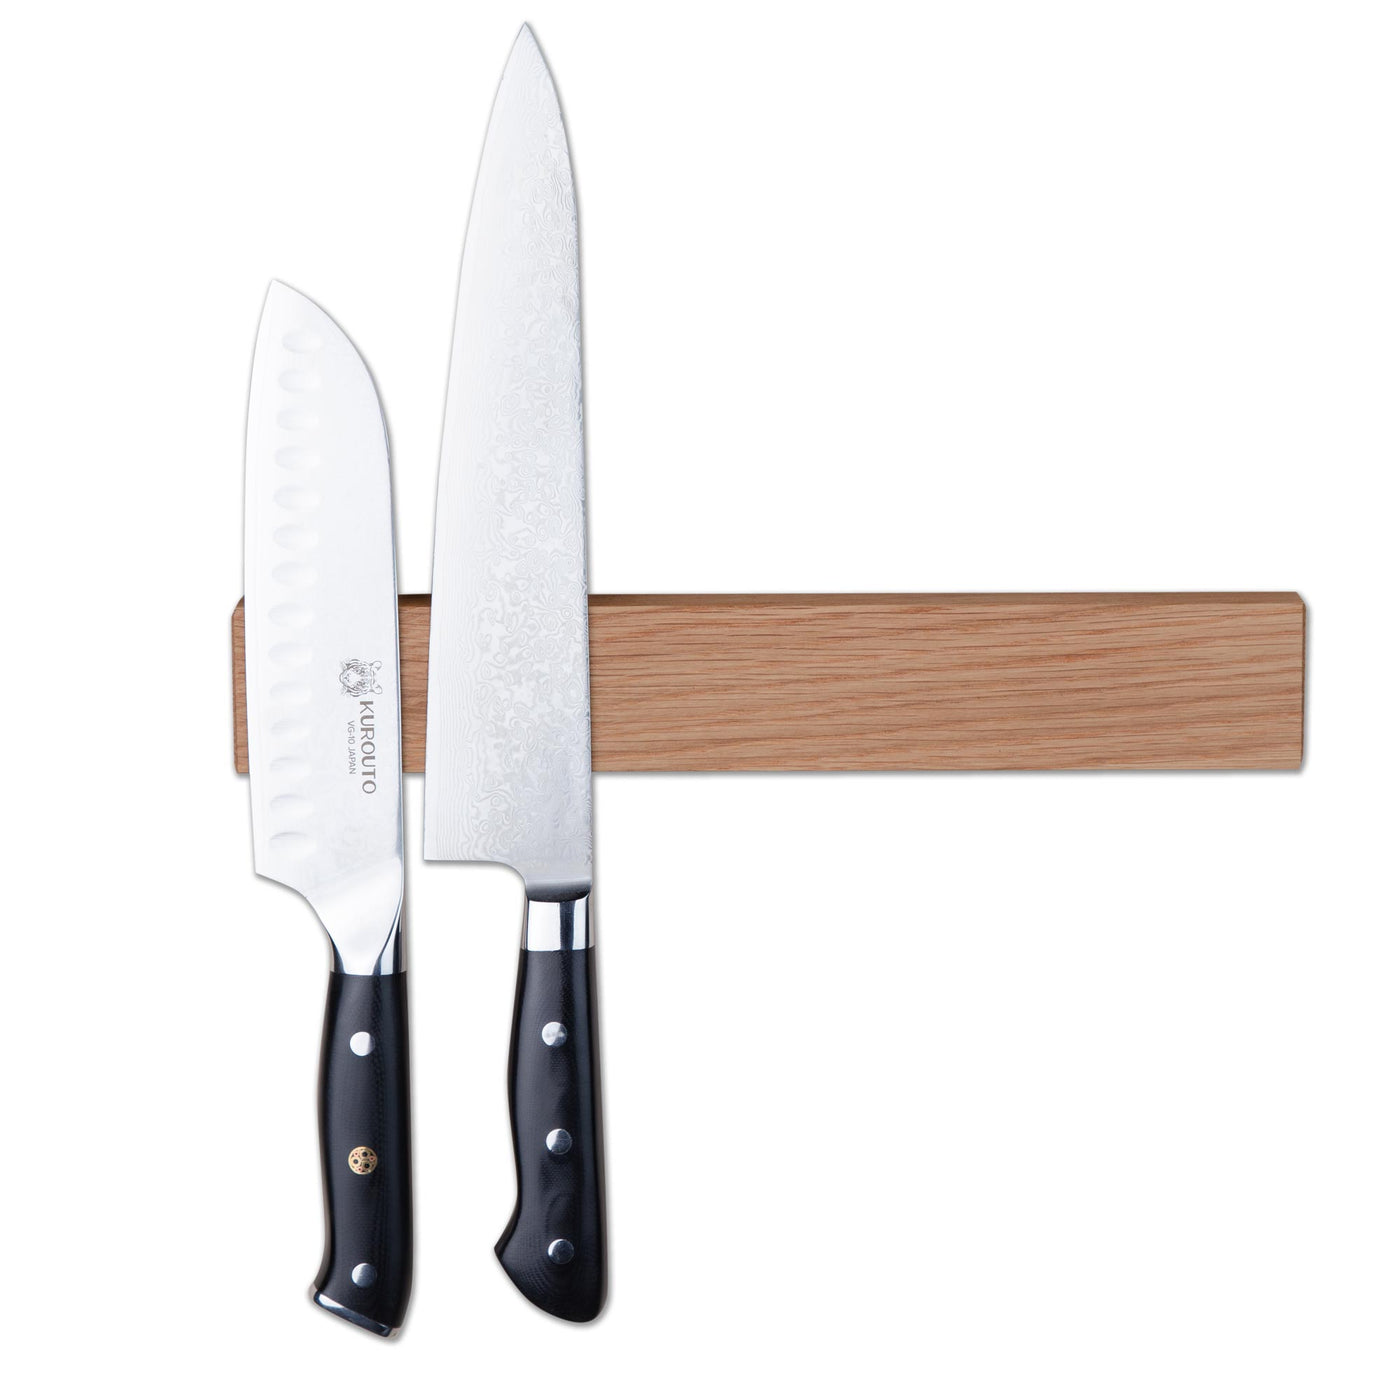 Kurouto Kitchenware White Oak Magnetic Knife Block -12 Inch -Made in t